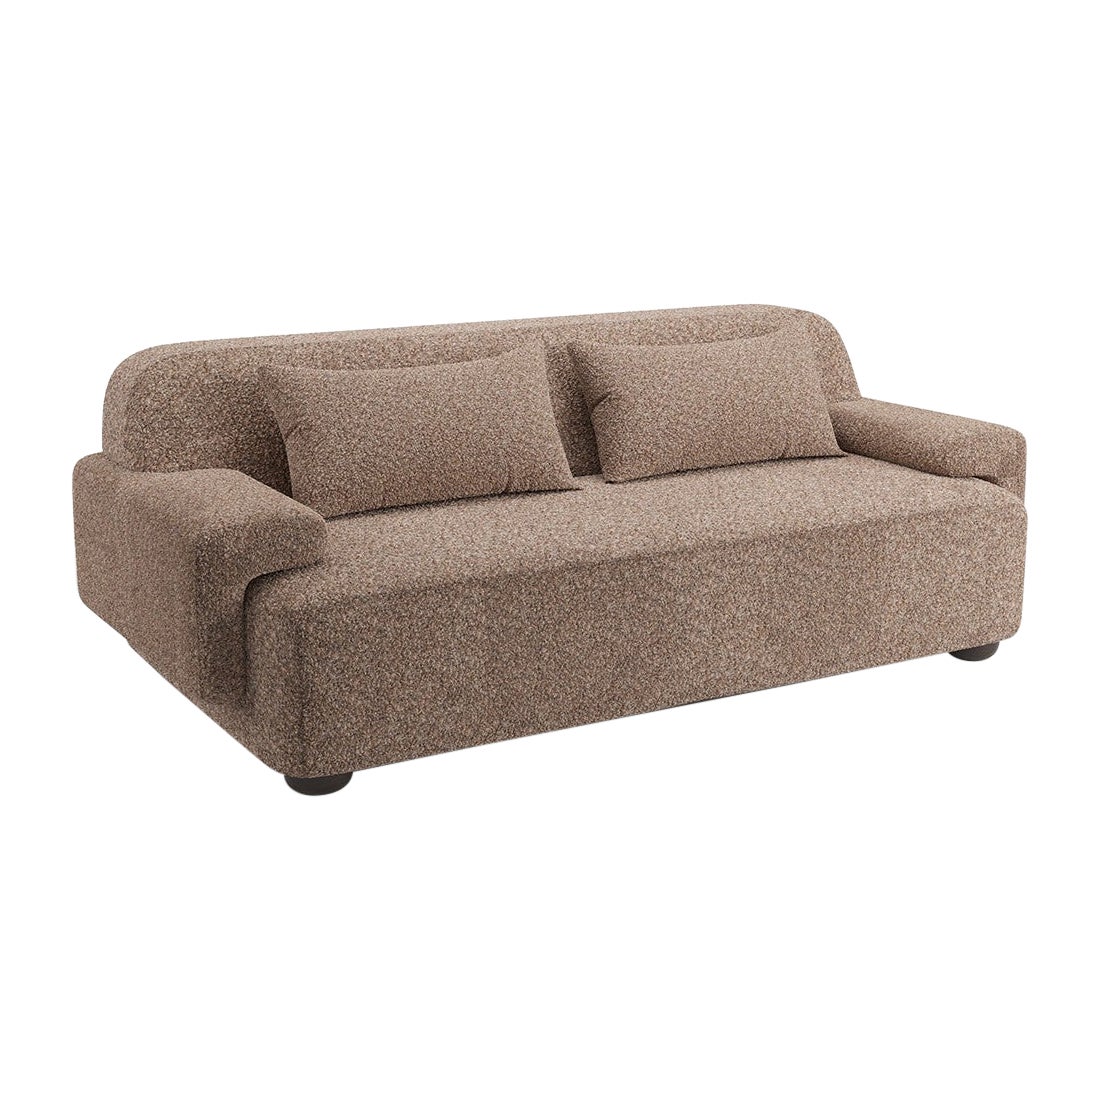 Popus Editions Lena 3 Seater Sofa in Ciotello Athena Loop Yarn Upholstery